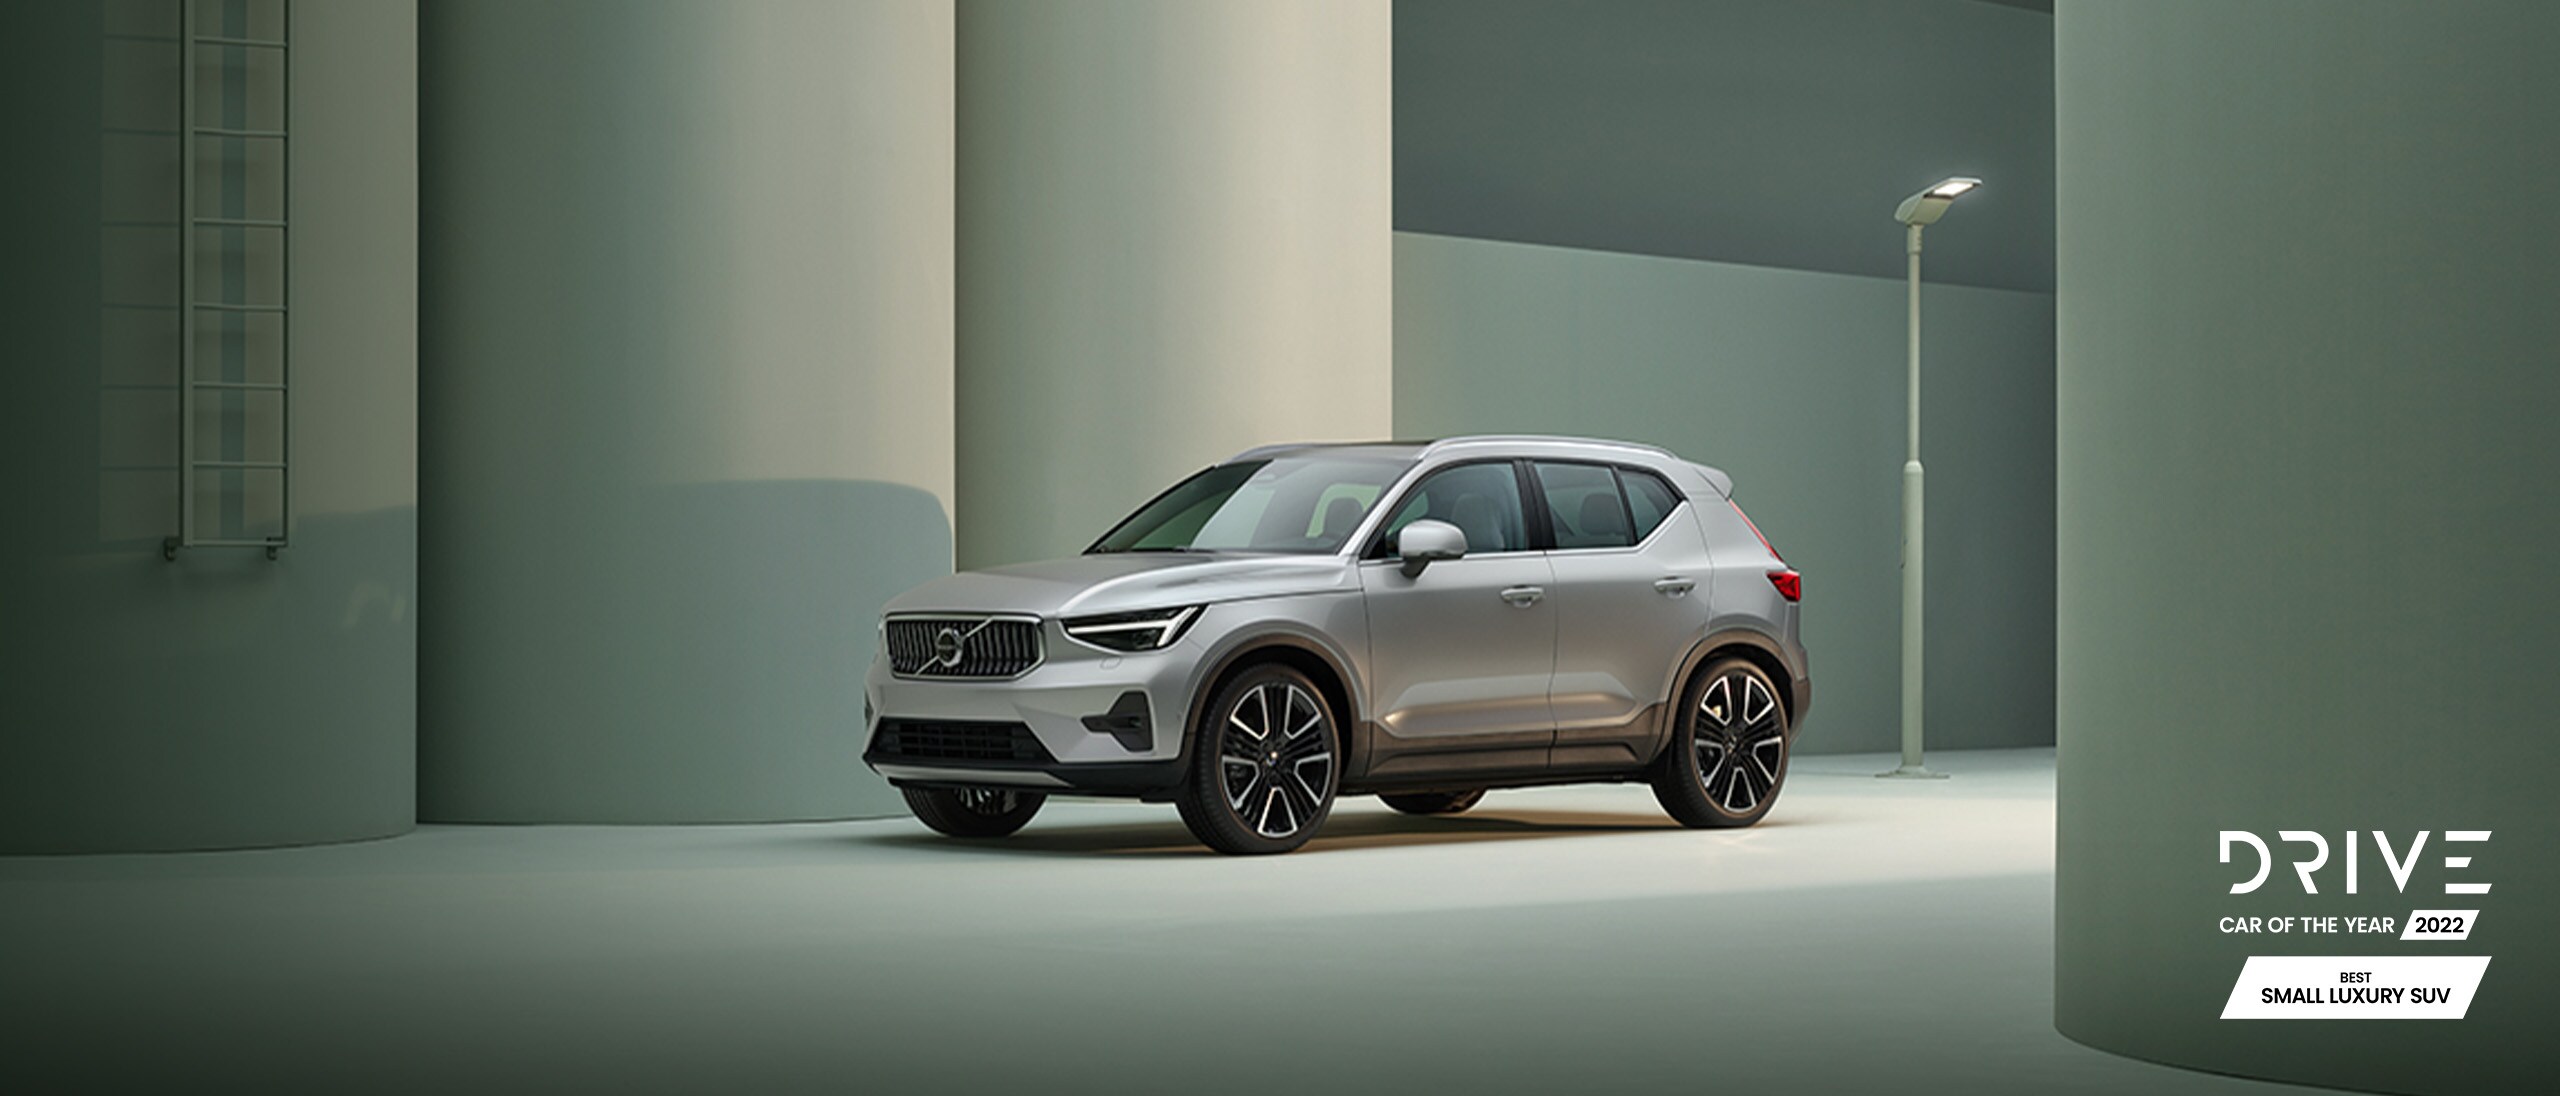 XC40 promo shot with  "Drive Car of the year" award text overlayed